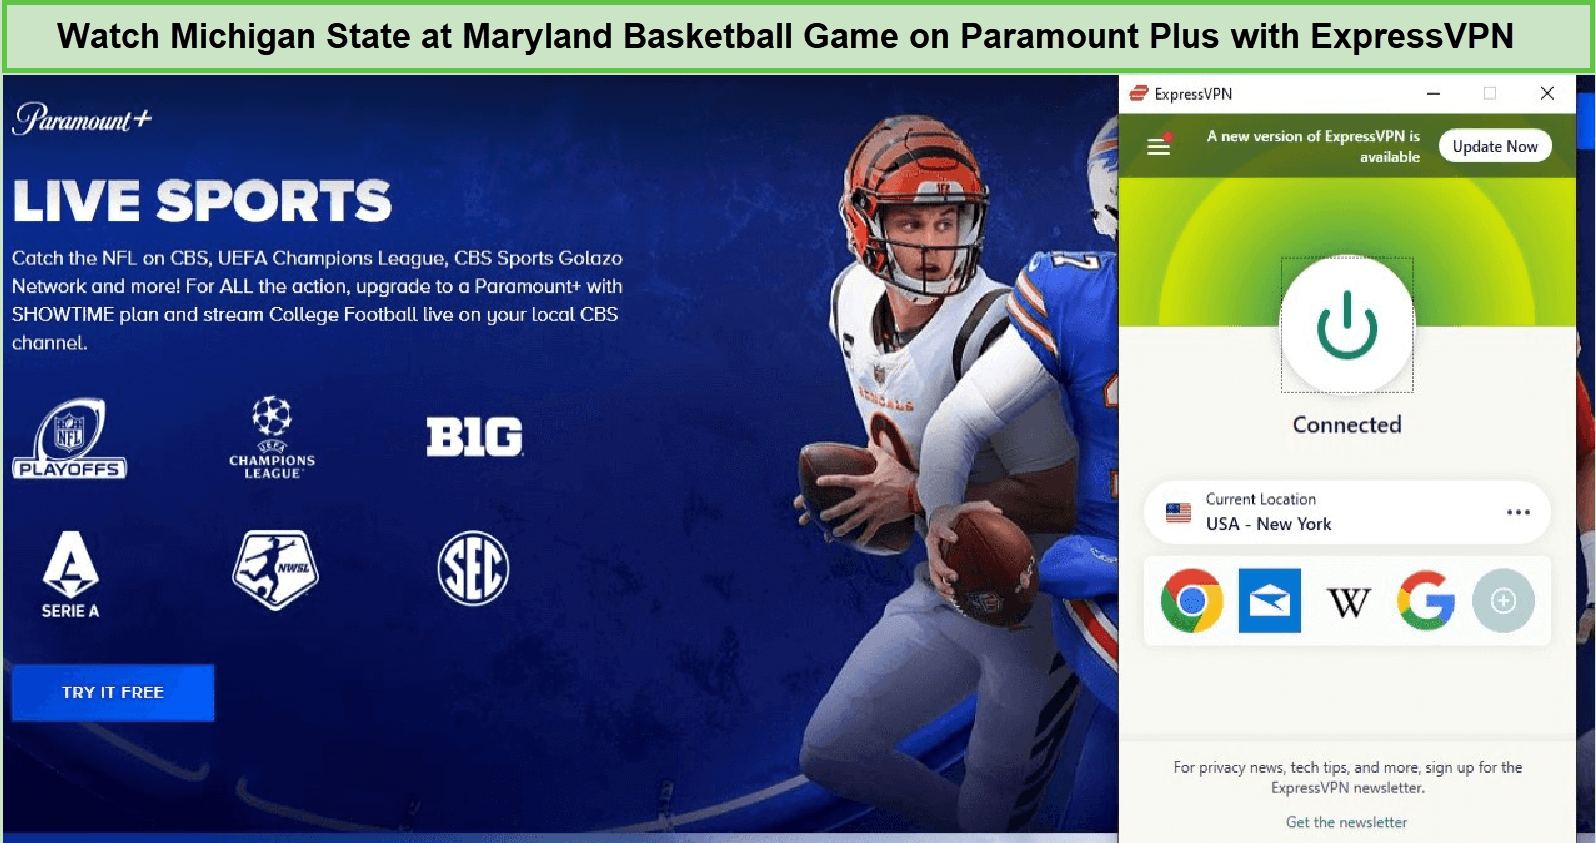 Watch-Michigan-State-at-Maryland-Basketball-Game-in-Netherlands-on-Paramount-Plus-with-ExpressVPN